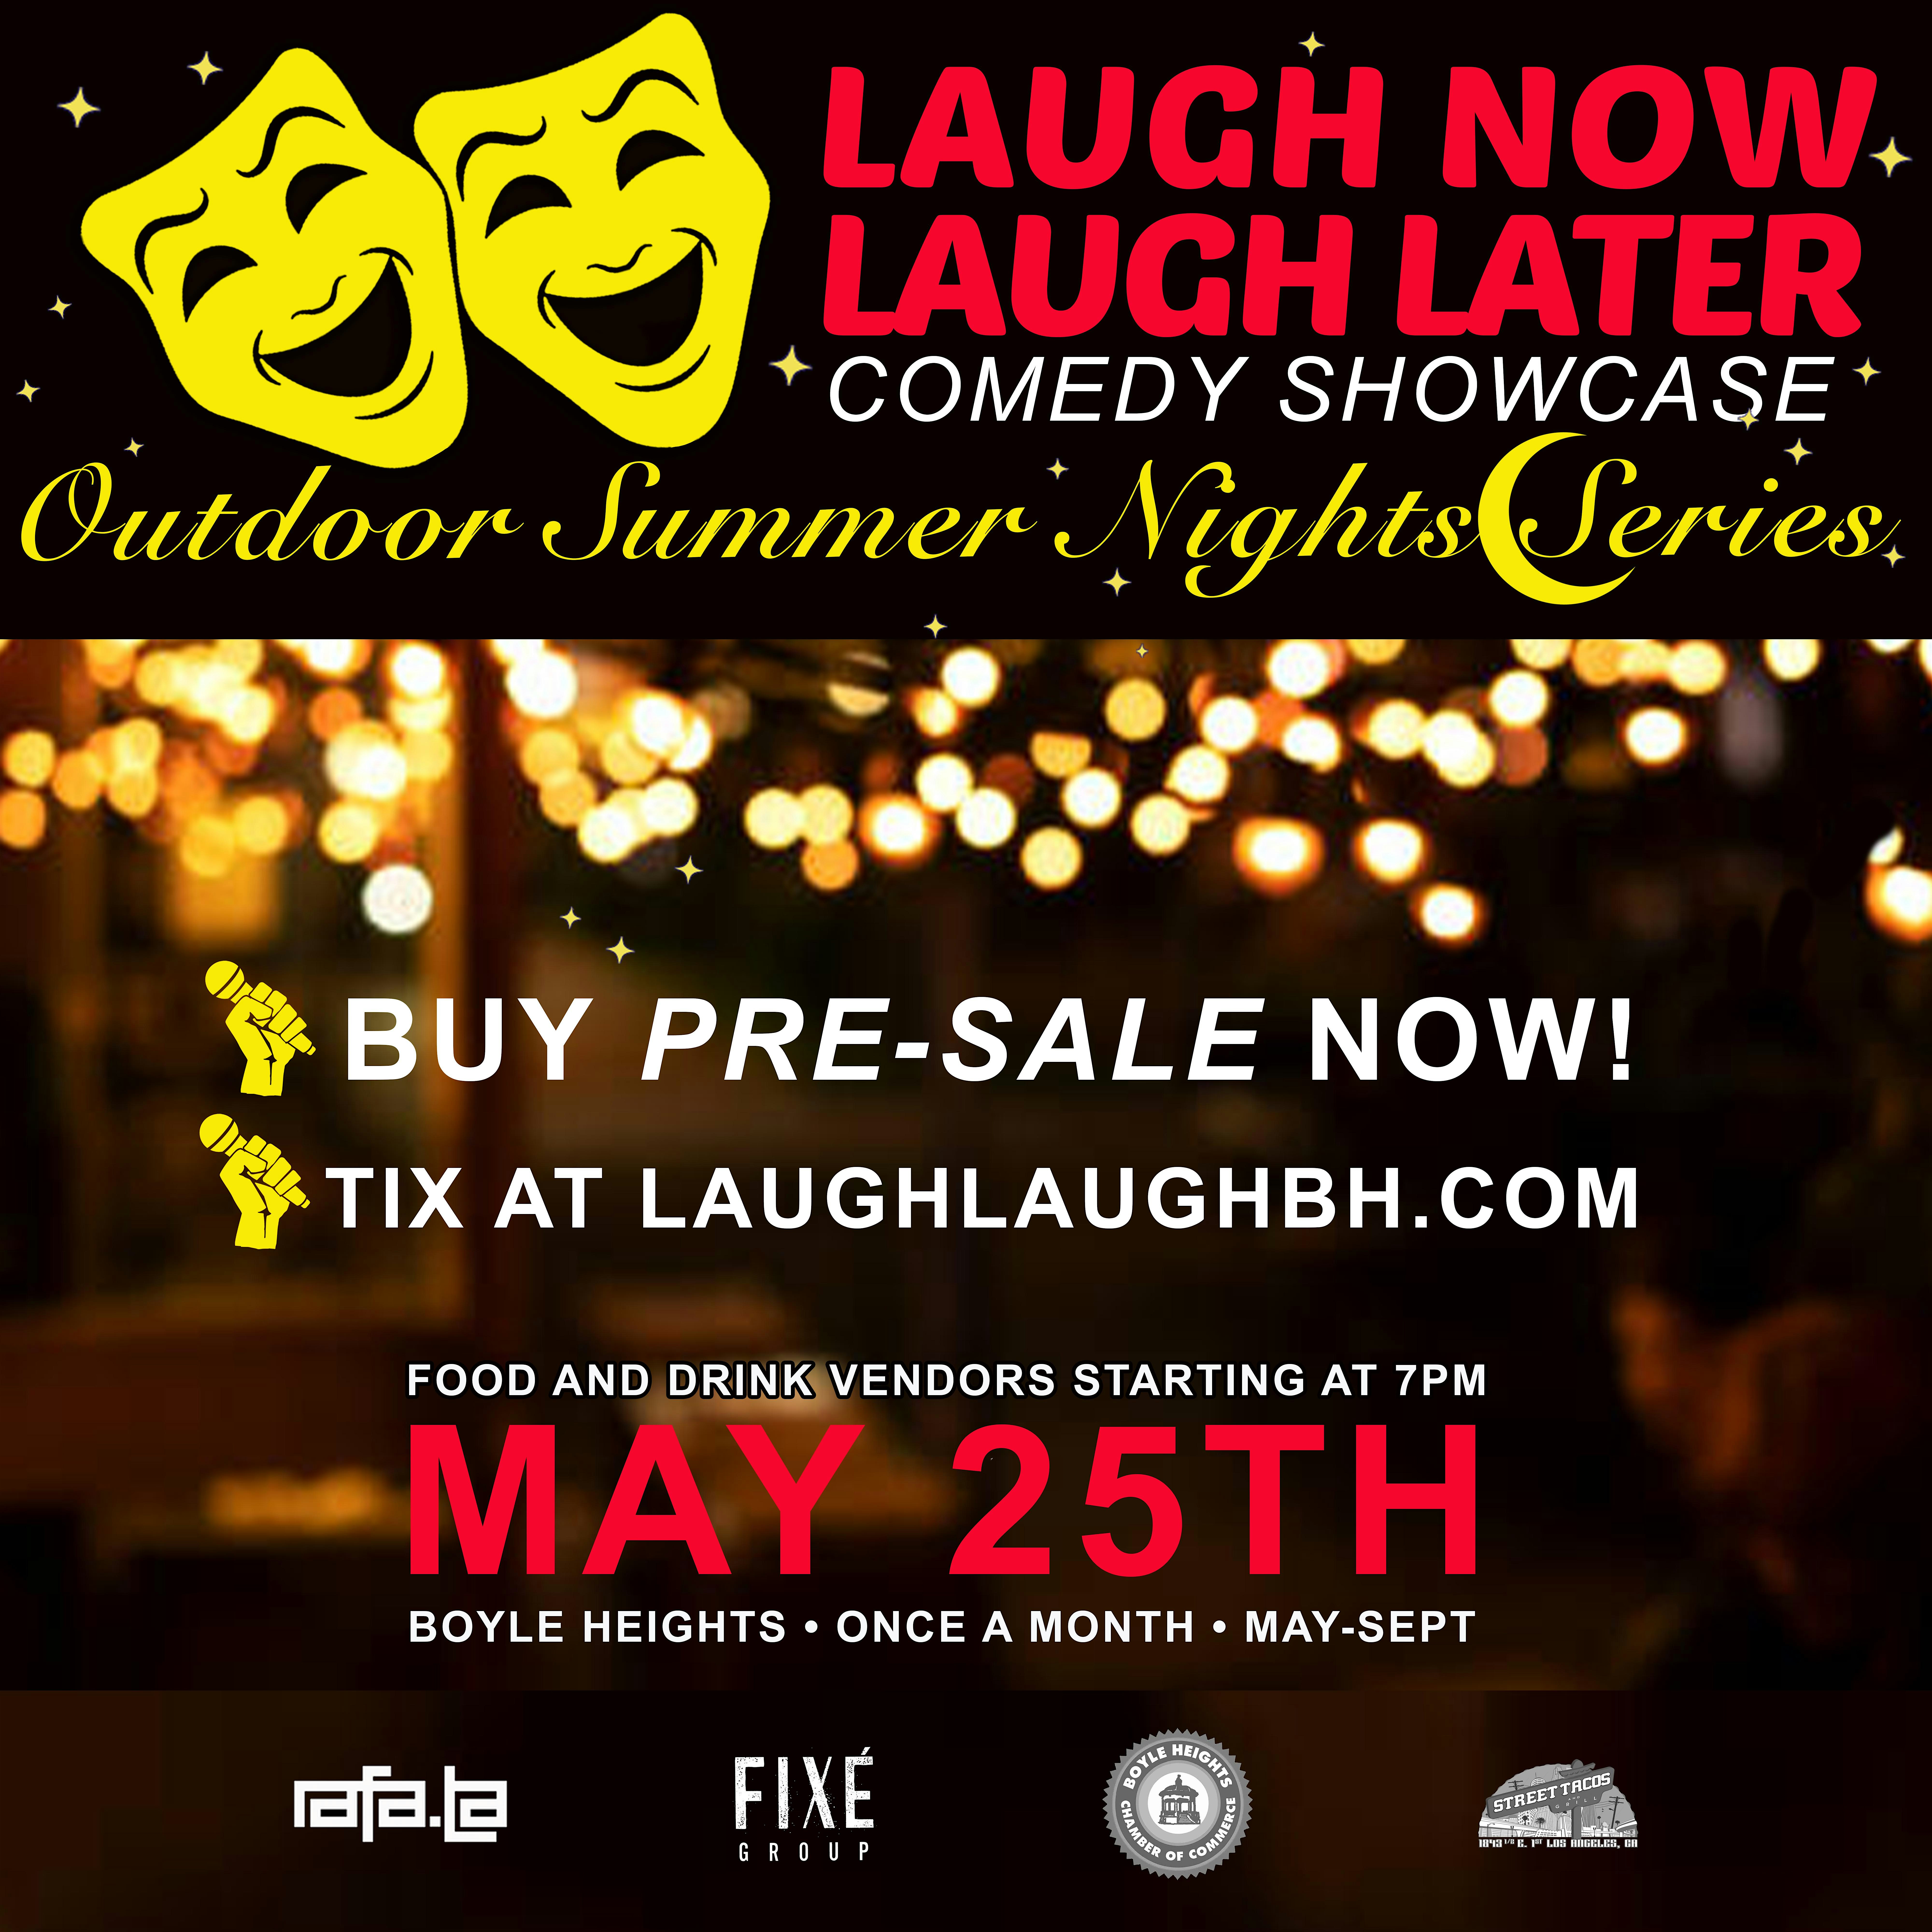 AUGUST- LAUGH NOW,  LAUGH LATER - Comedy Showcase